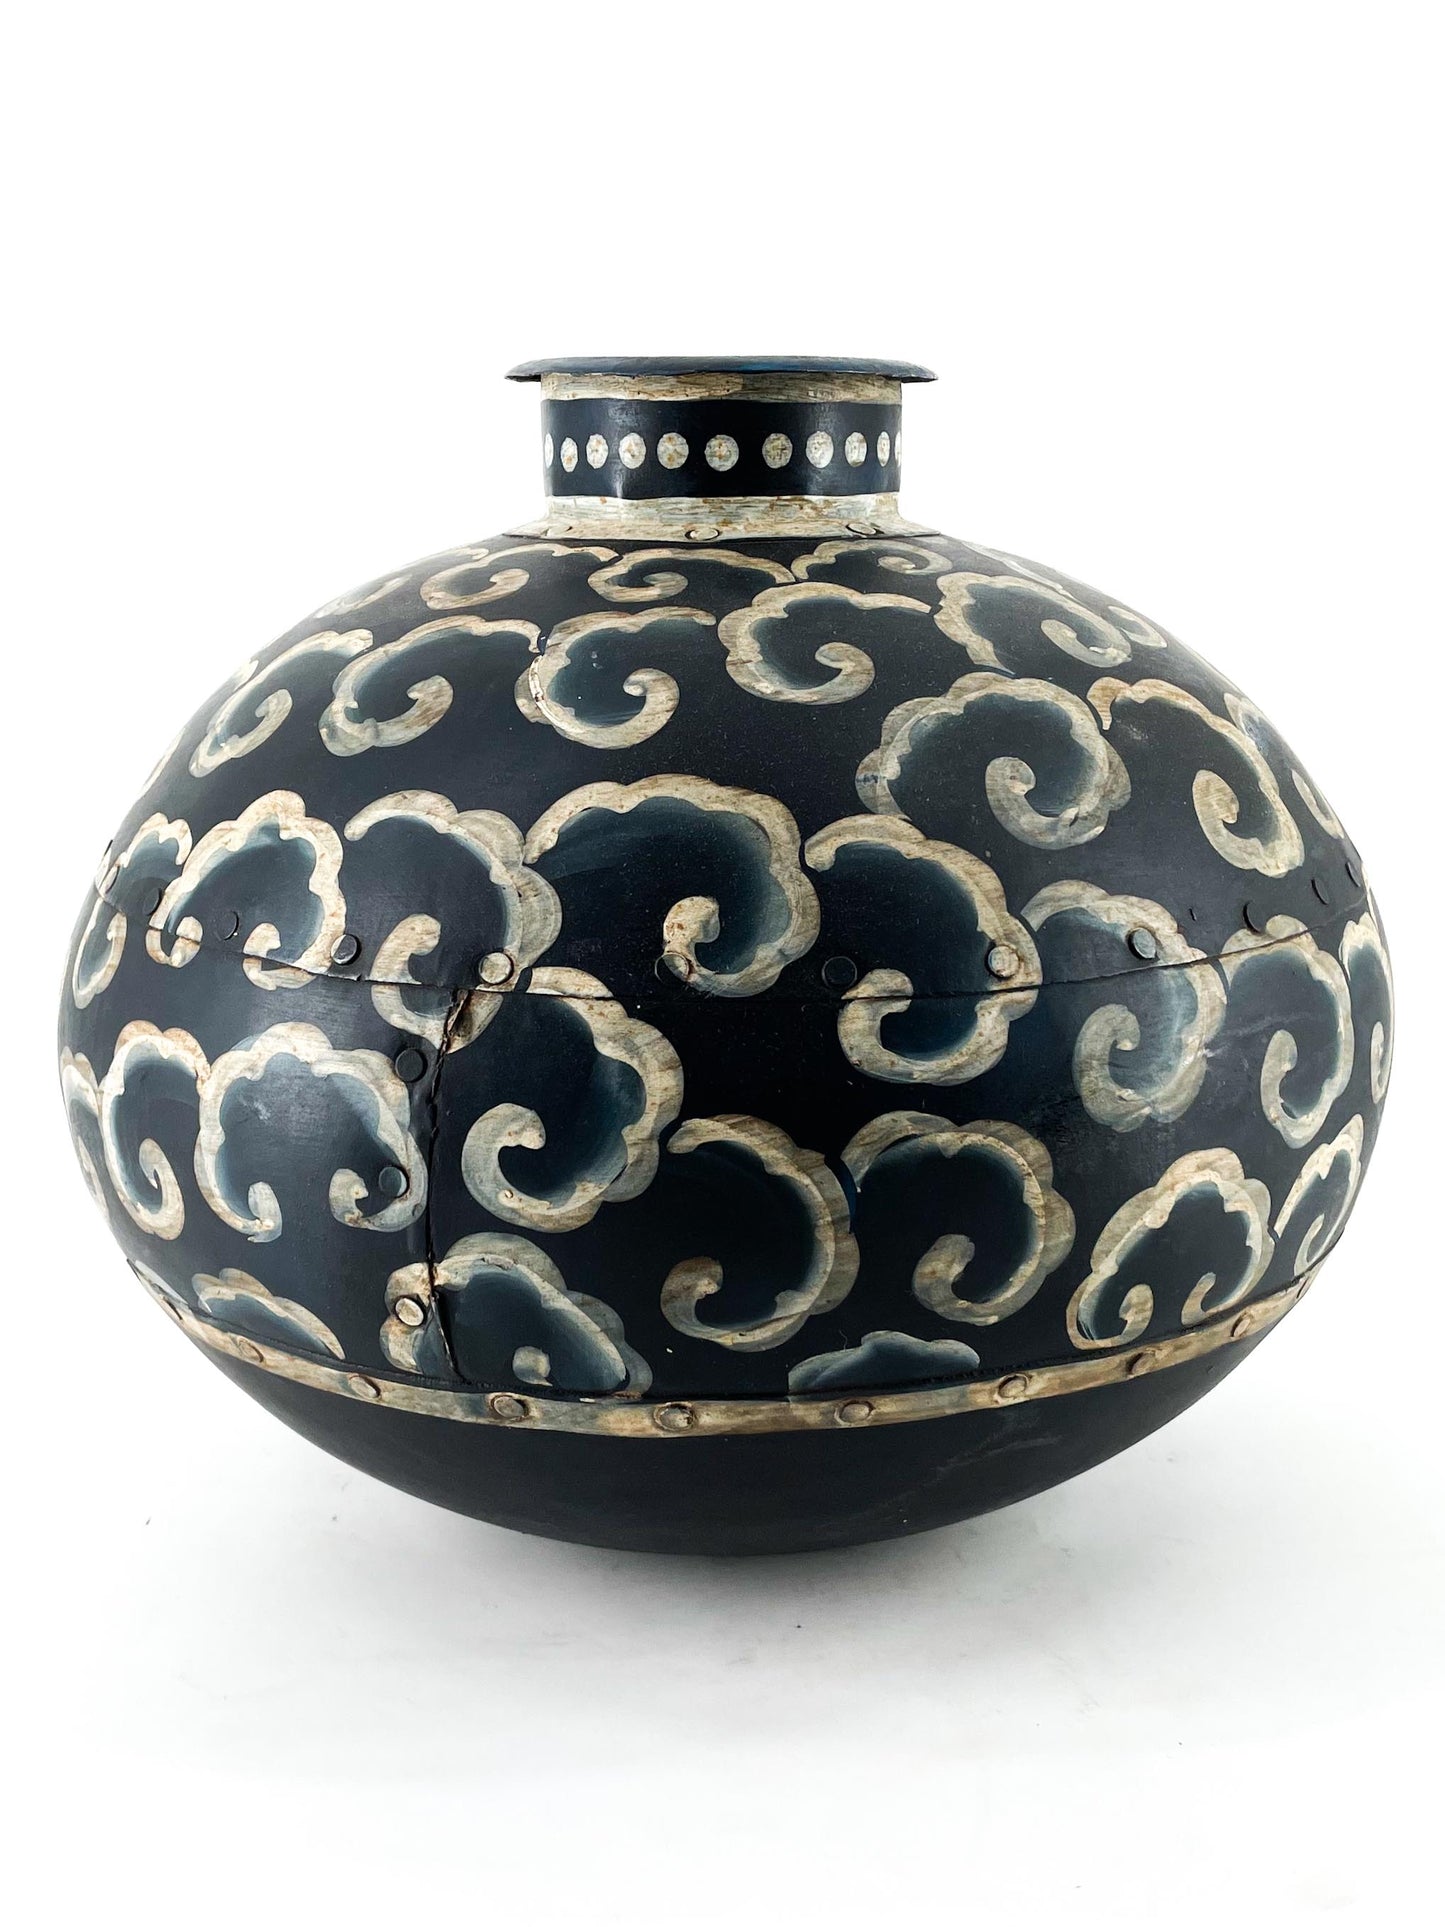 old hand-painted iron pot #2